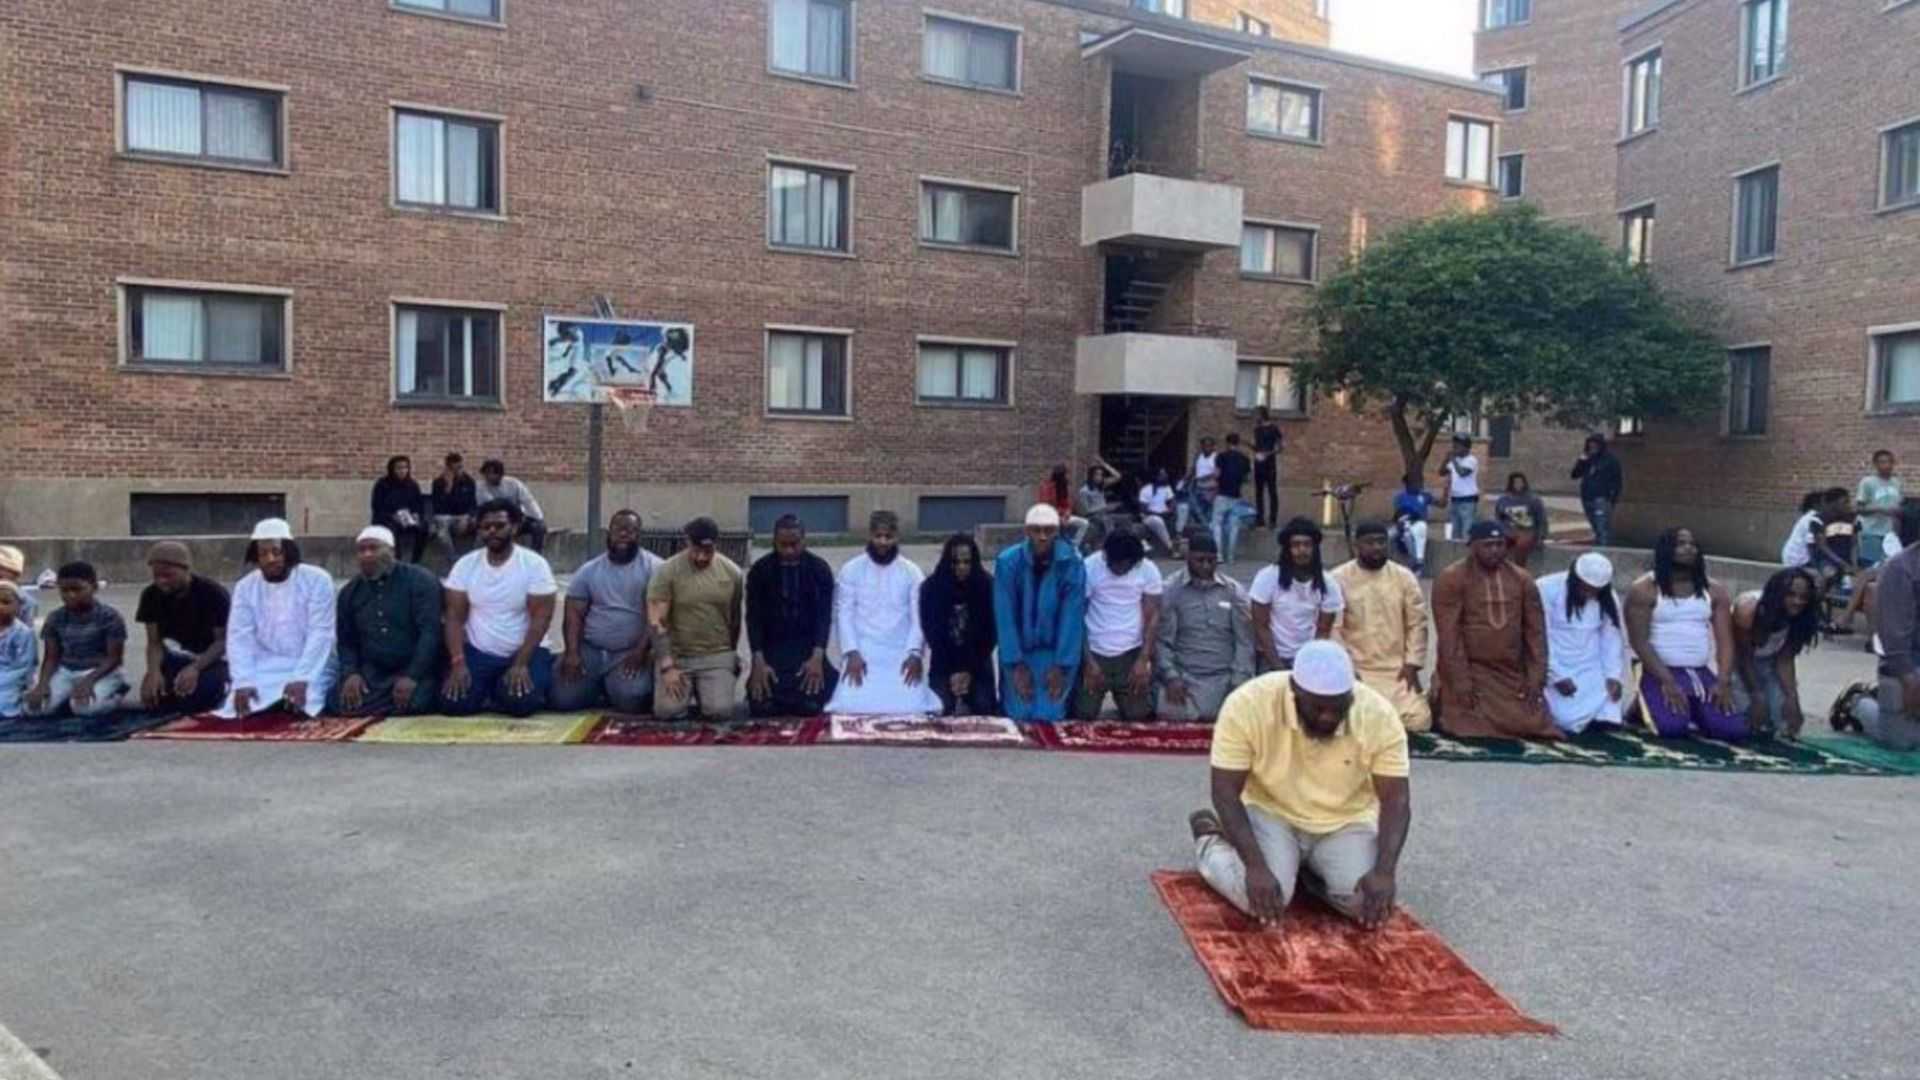 How the Religion of Islam Changed O Block, Chicago Gang members